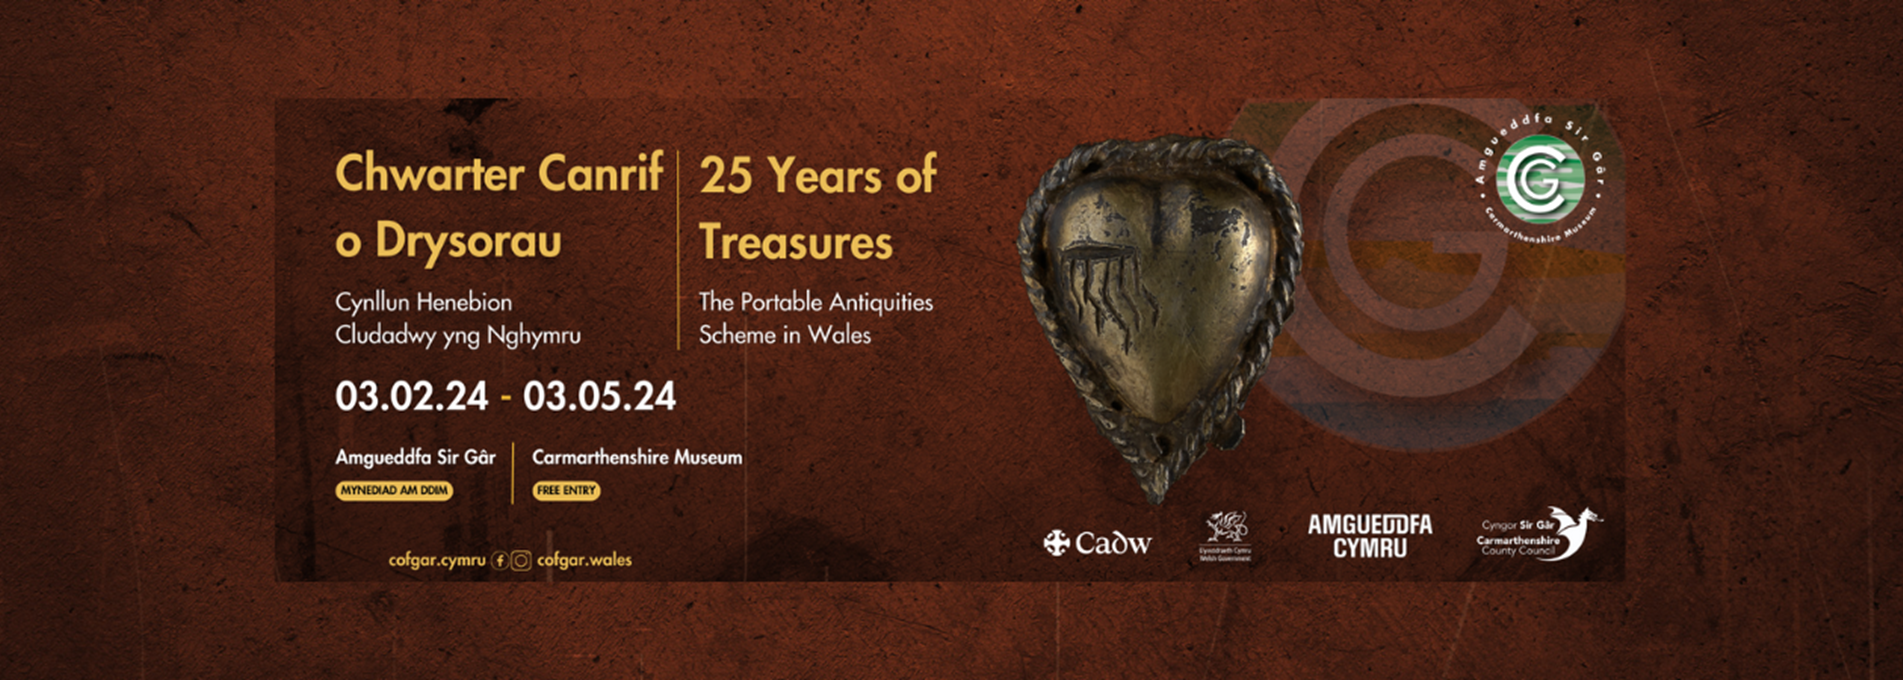 25 Years of Treasures - The Portable Antiquities Scheme in Wales